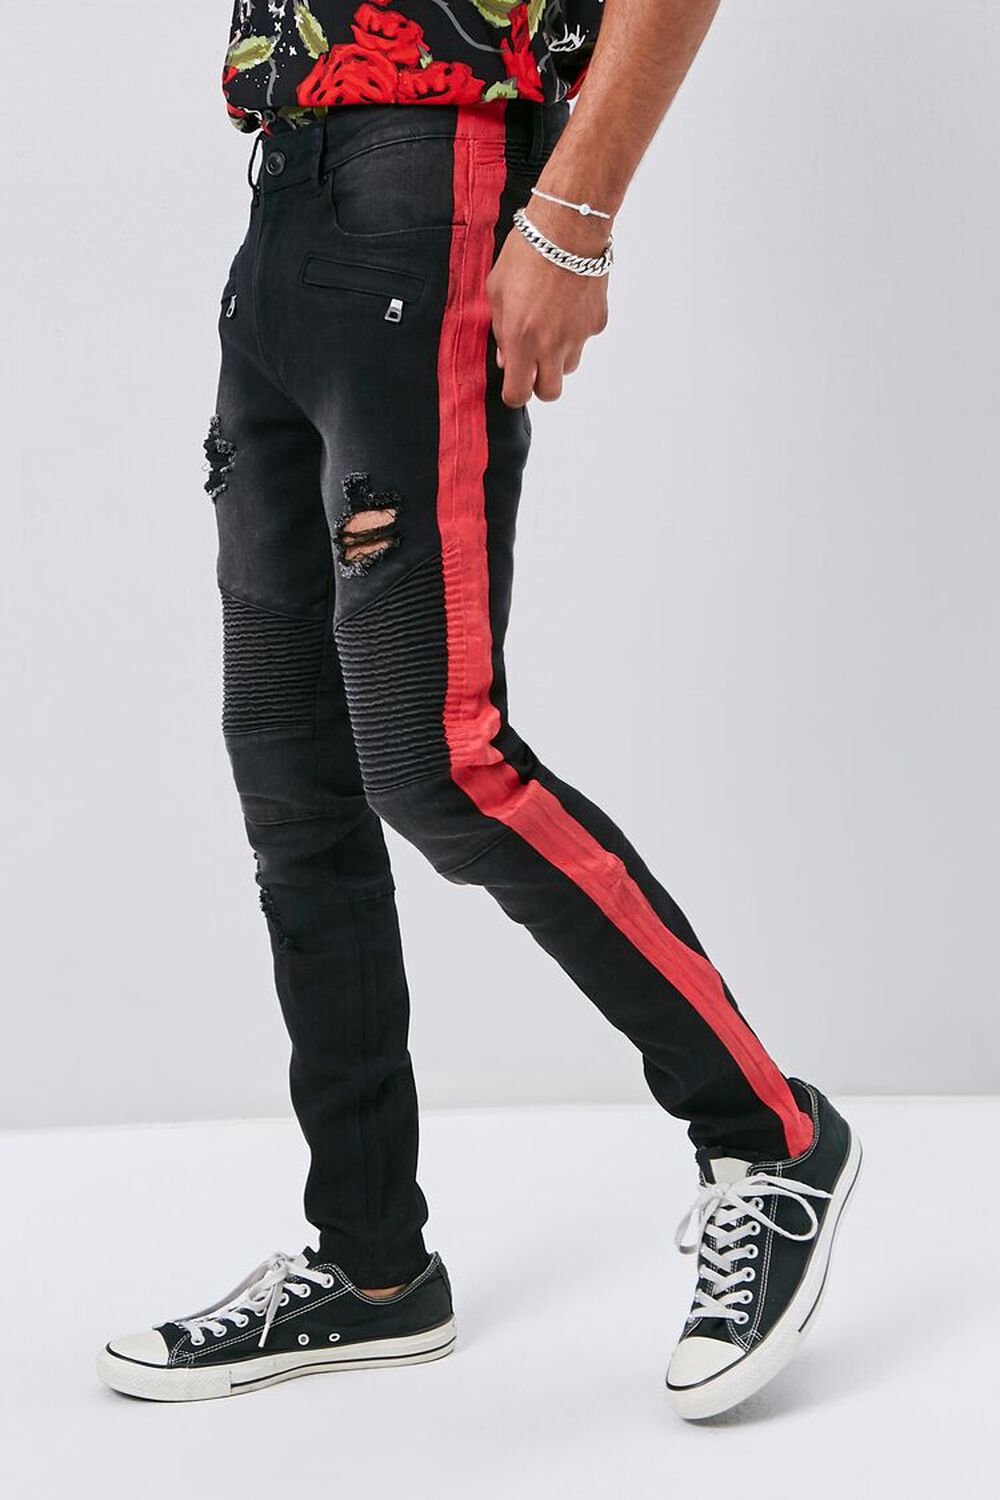 WASHED BLACK/RED Side-Striped Distressed Moto Jeans, image 1